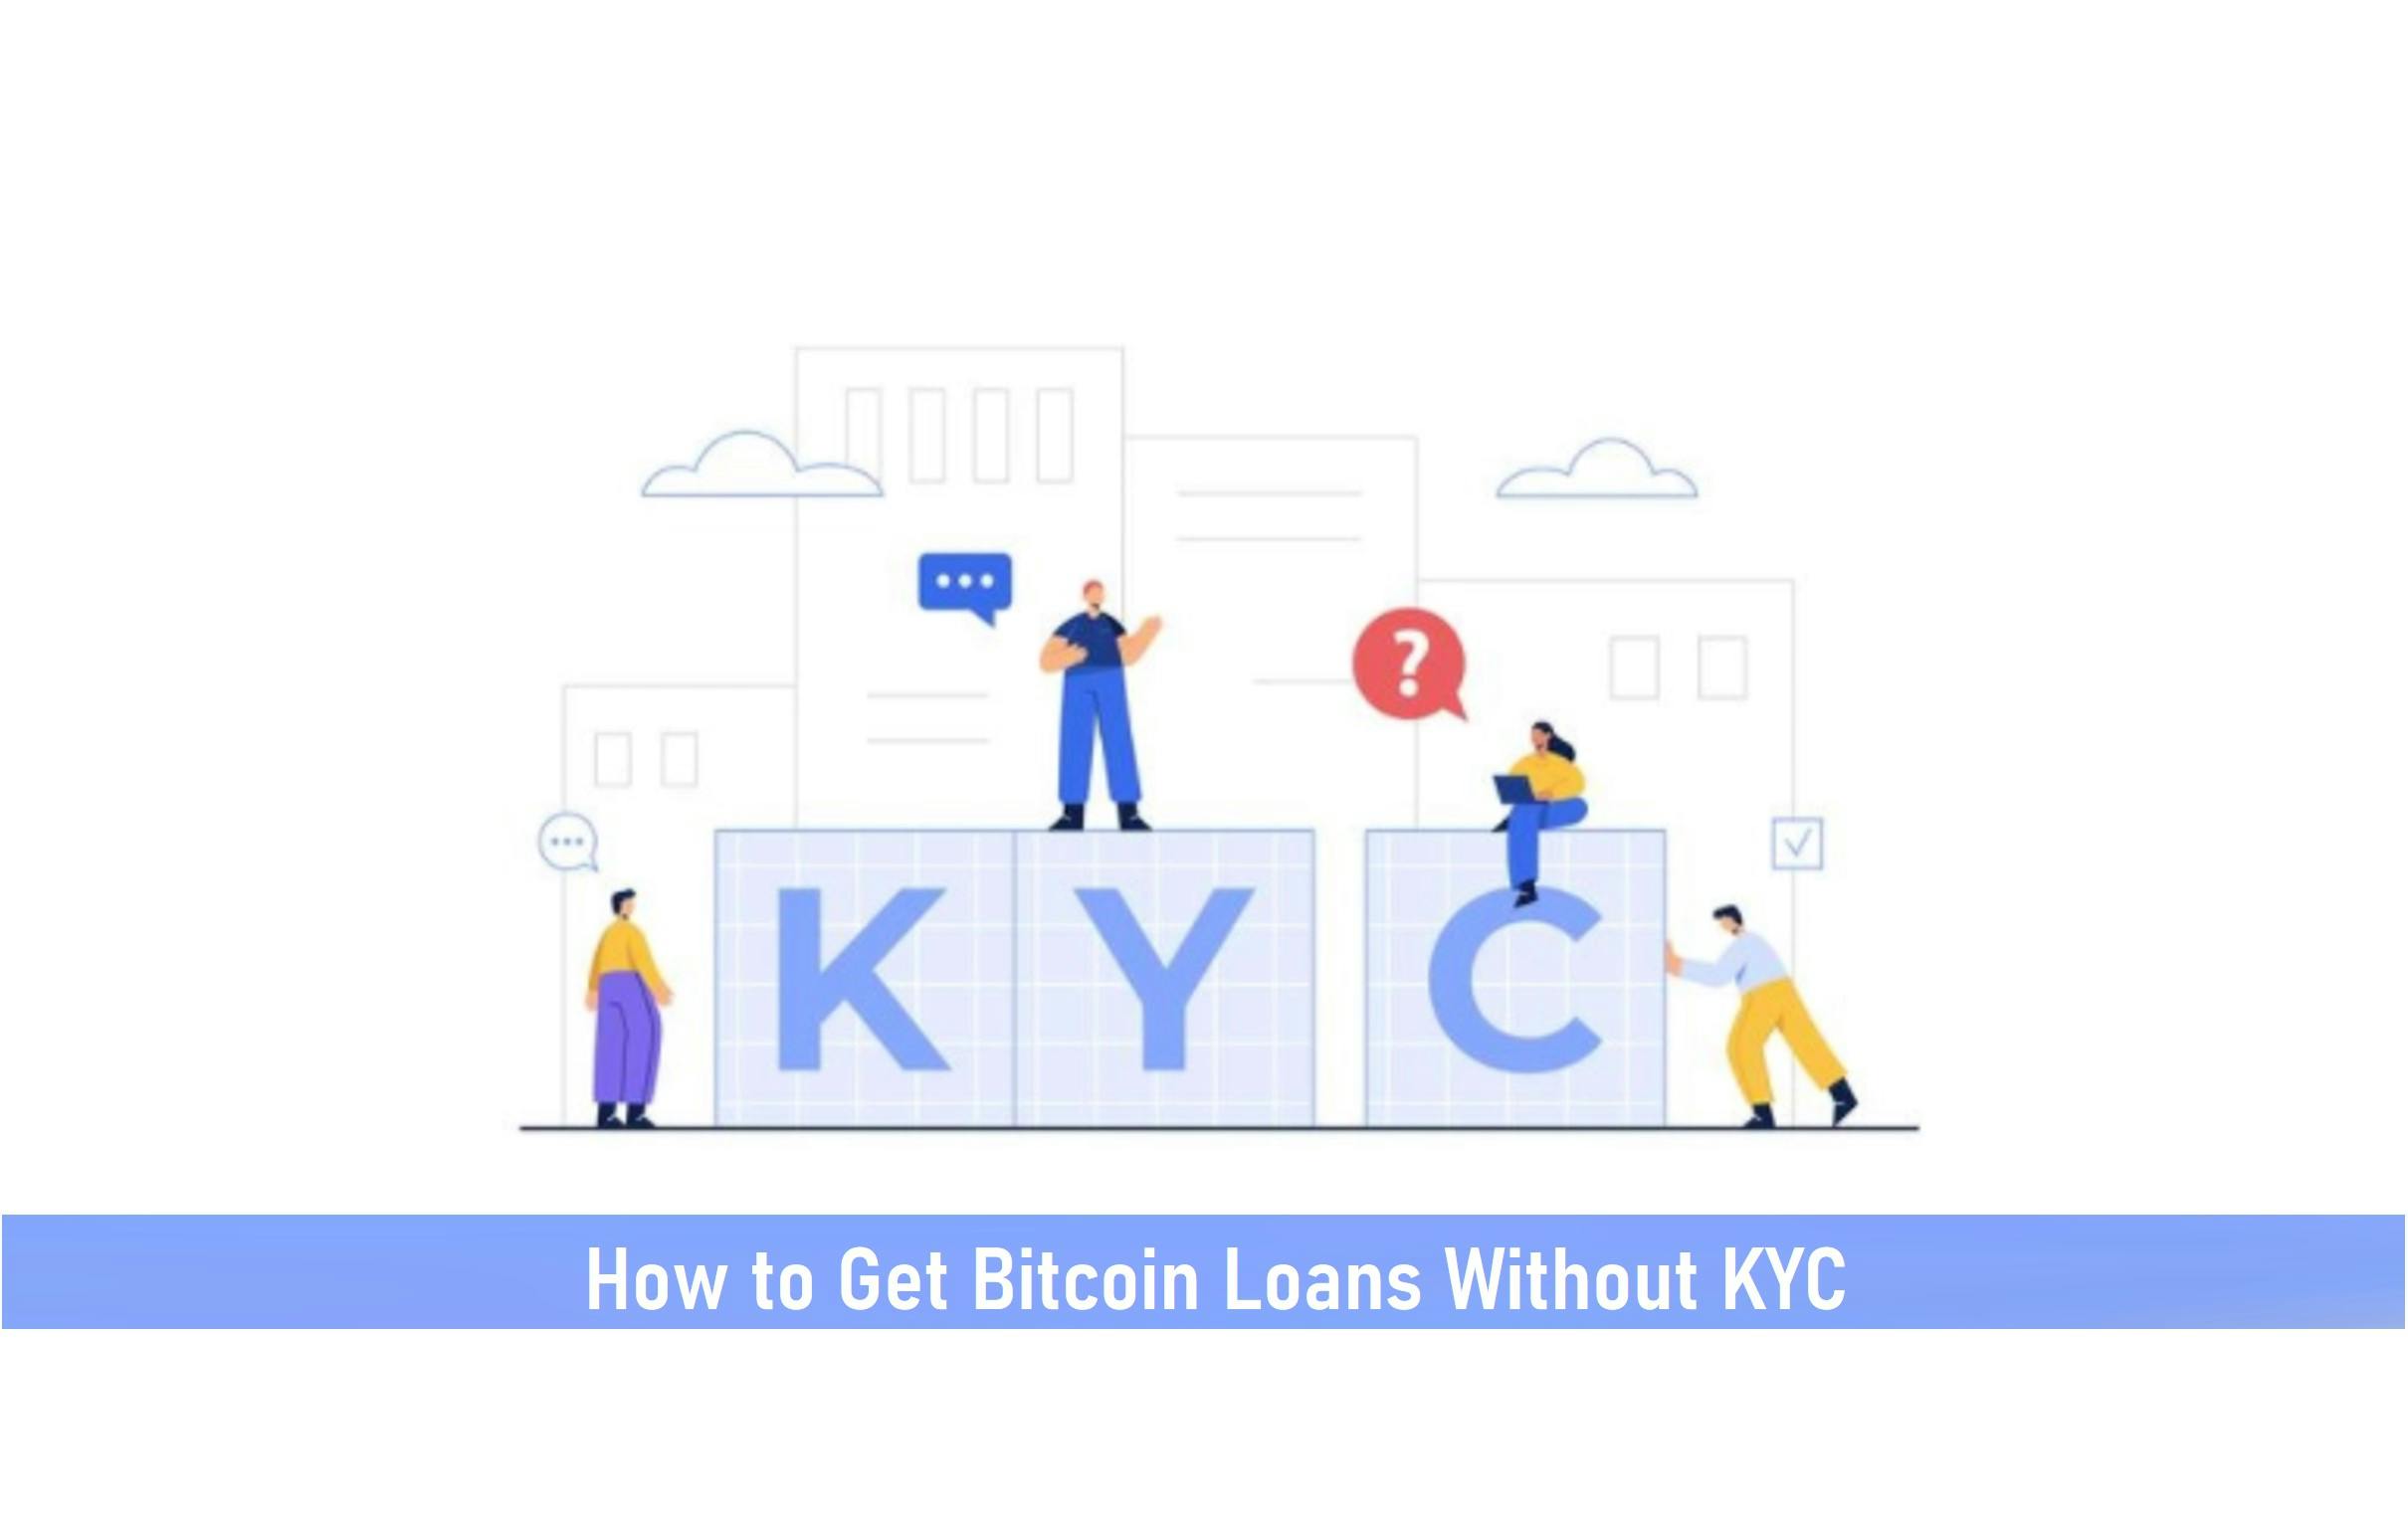 How to Get Bitcoin Loans Without KYC